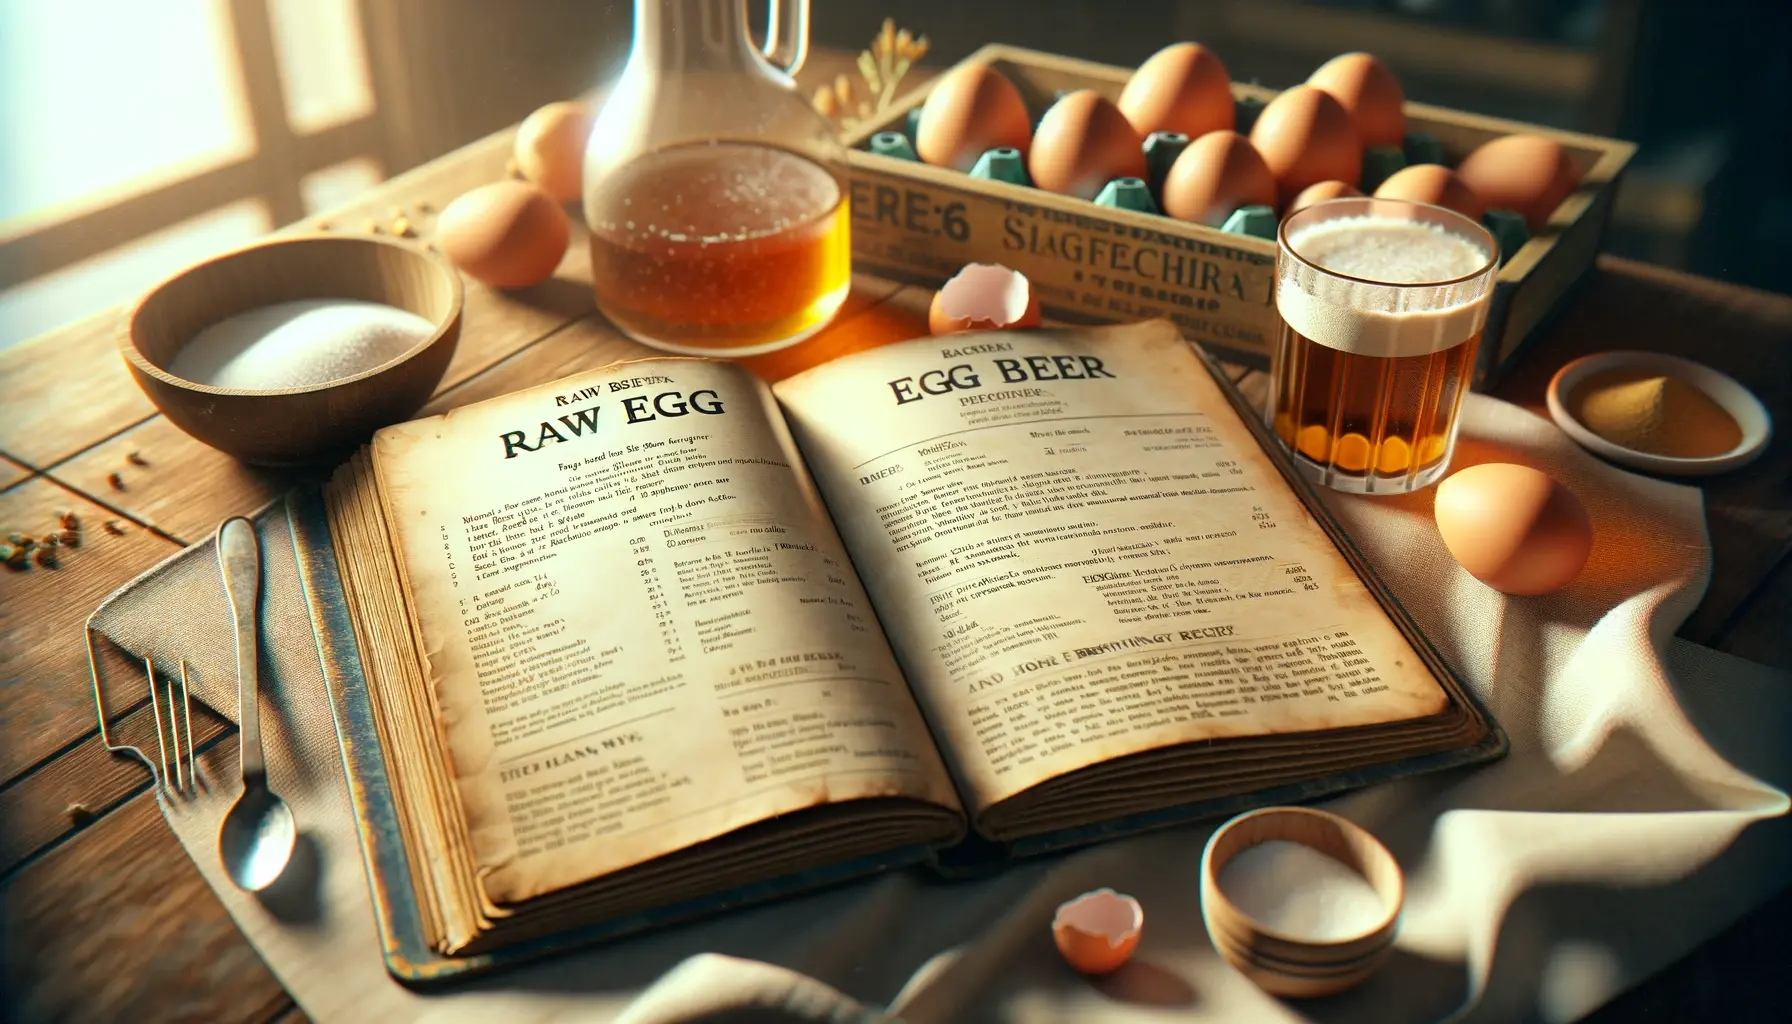 open vintage recipe book showing the raw egg beer recipe, with ingredients like eggs and sugar visible on the table.